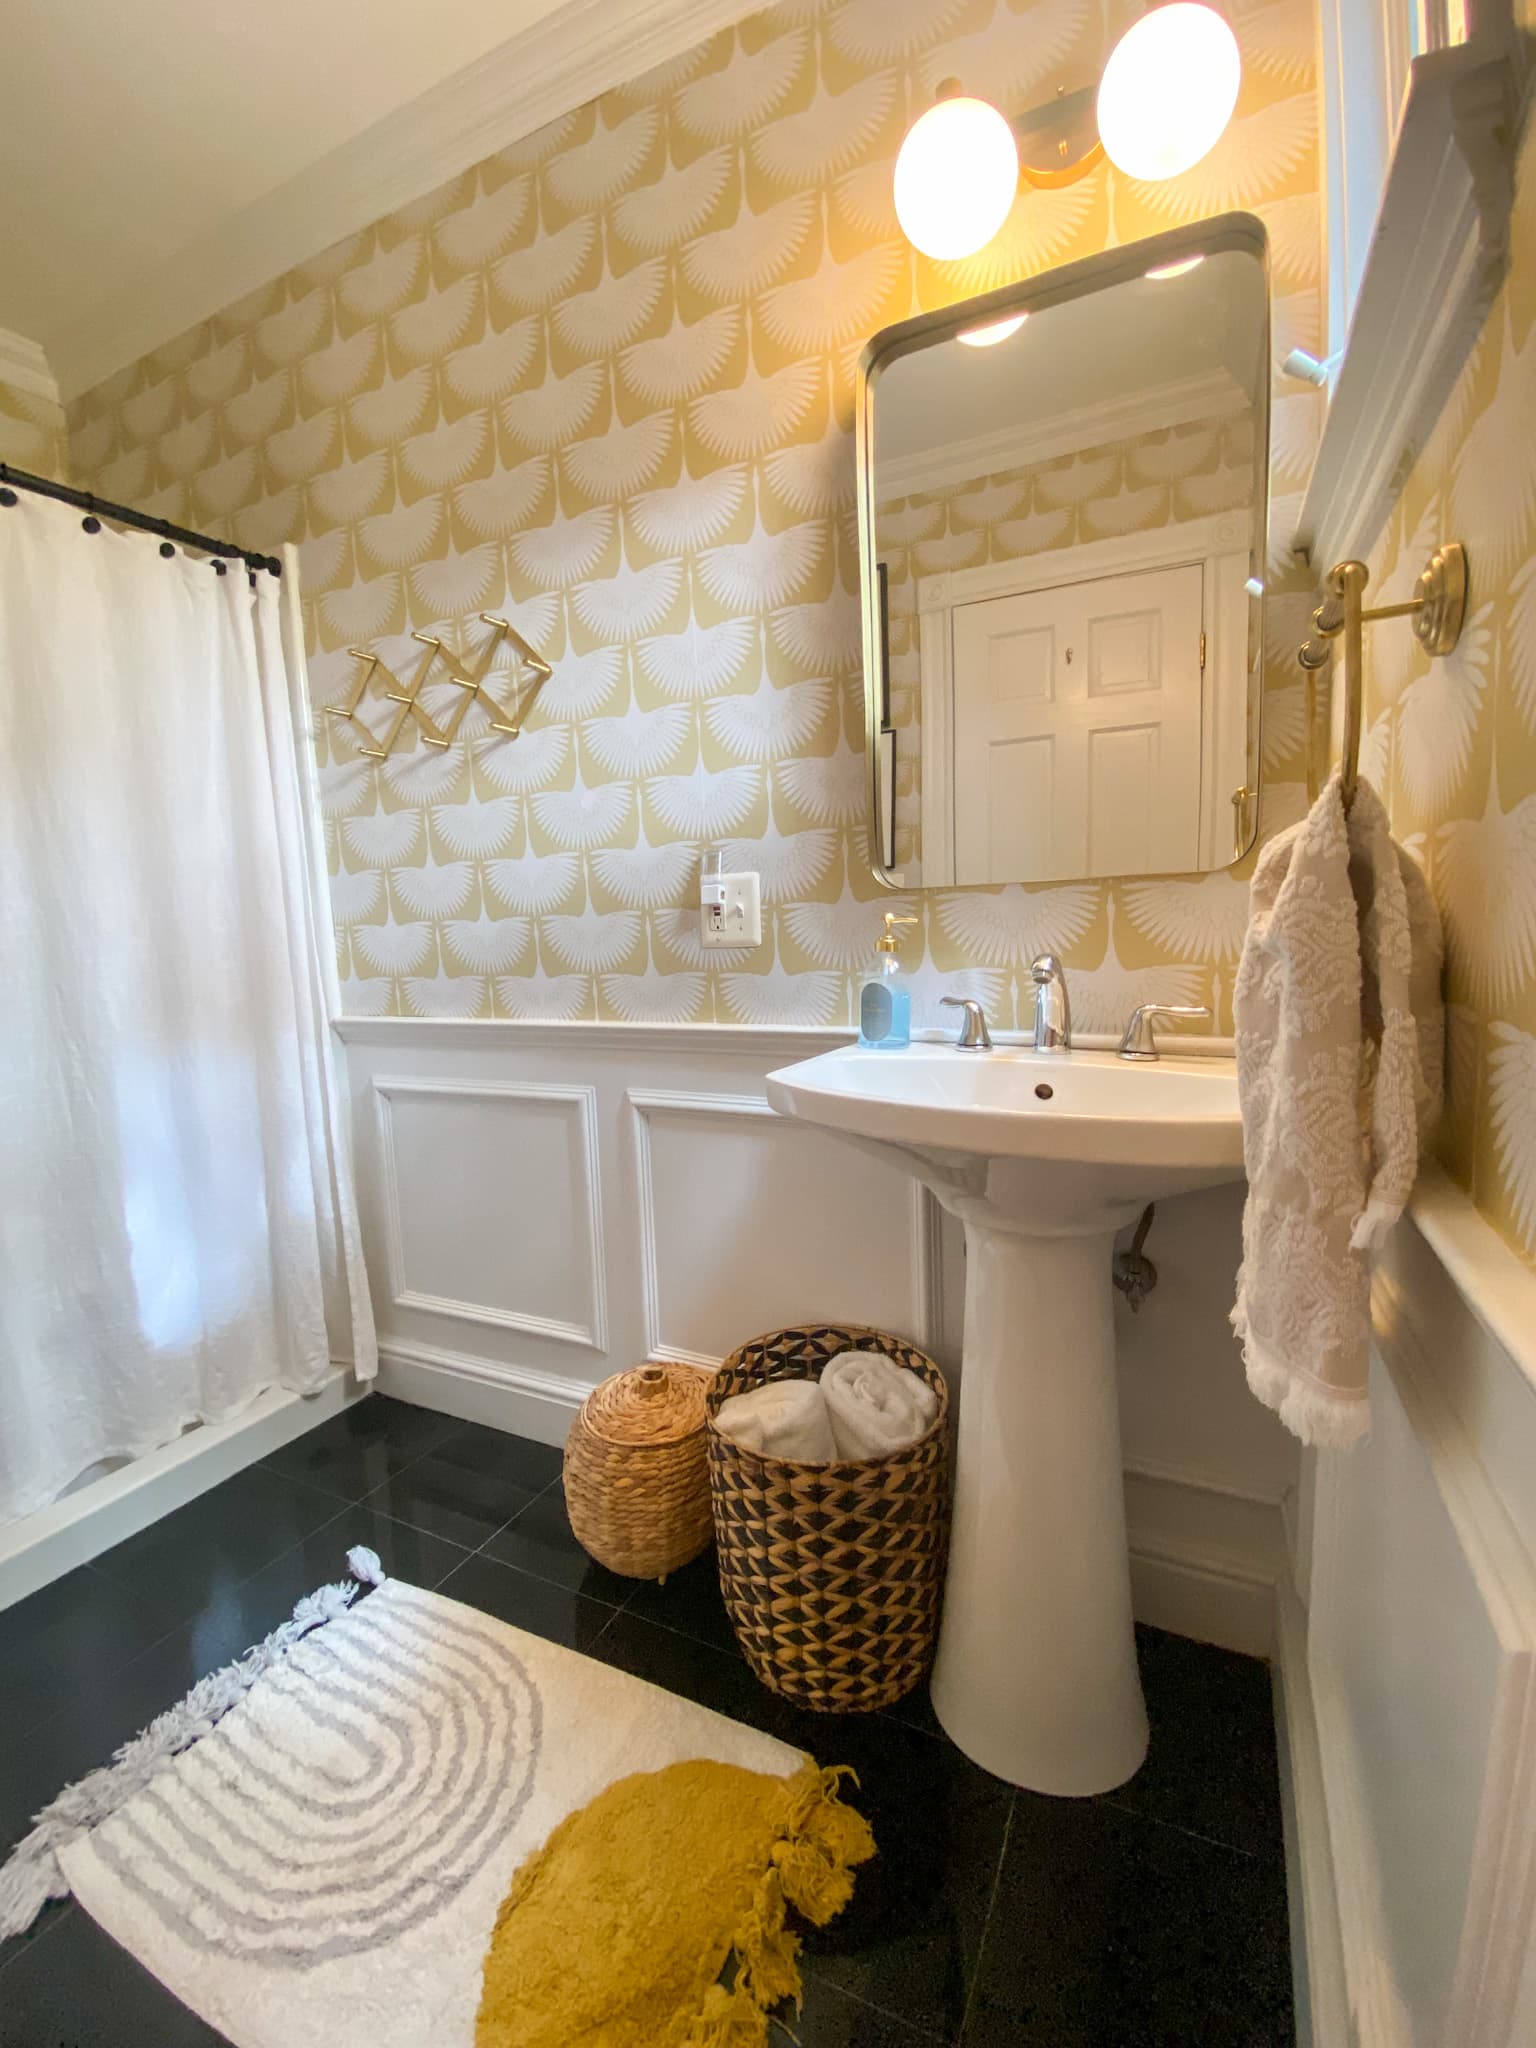 adding personality to a bathroom